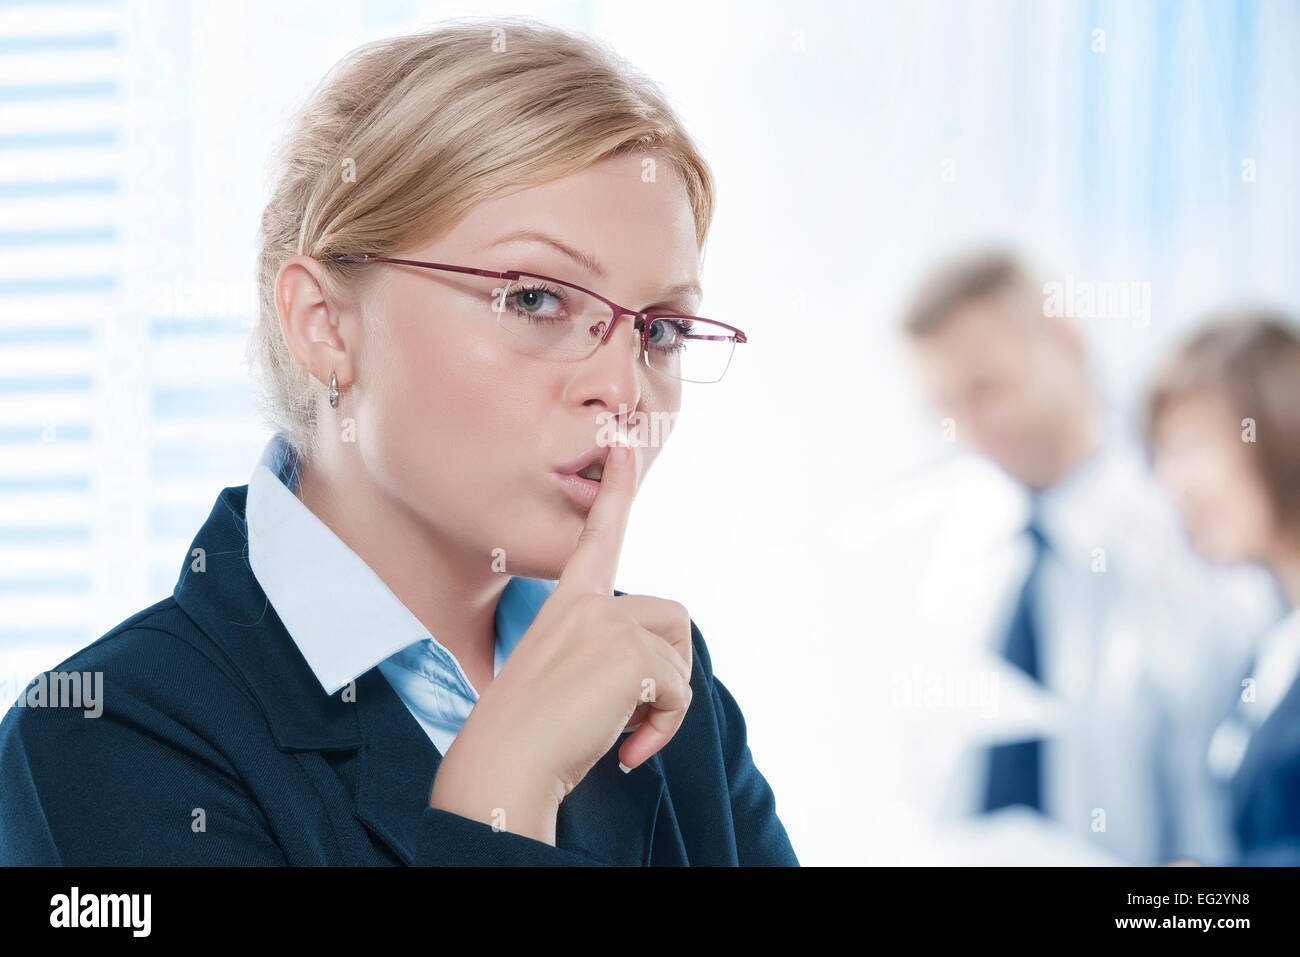 Portrait of young beautiful woman in office environment Stock Photo